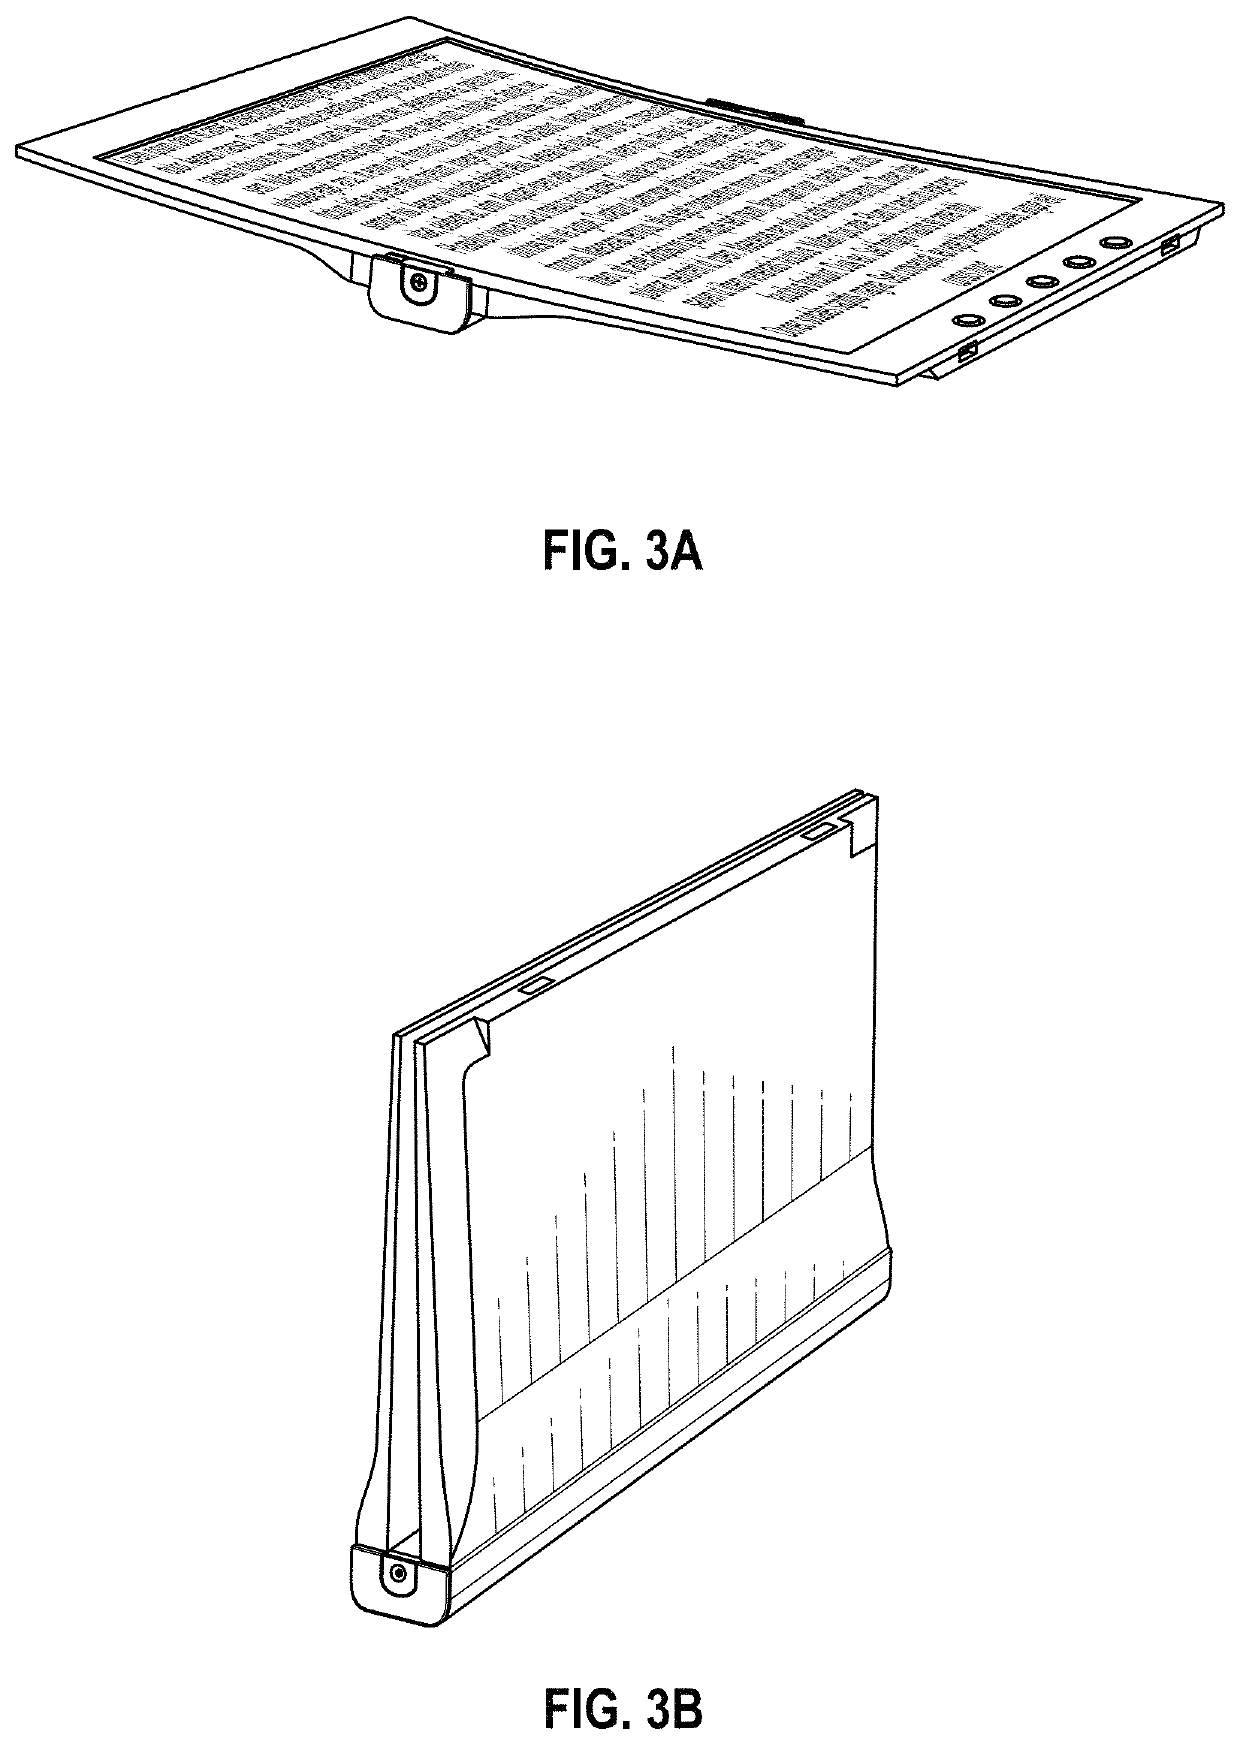 Foldable electro-optic display including digitization and touch sensing